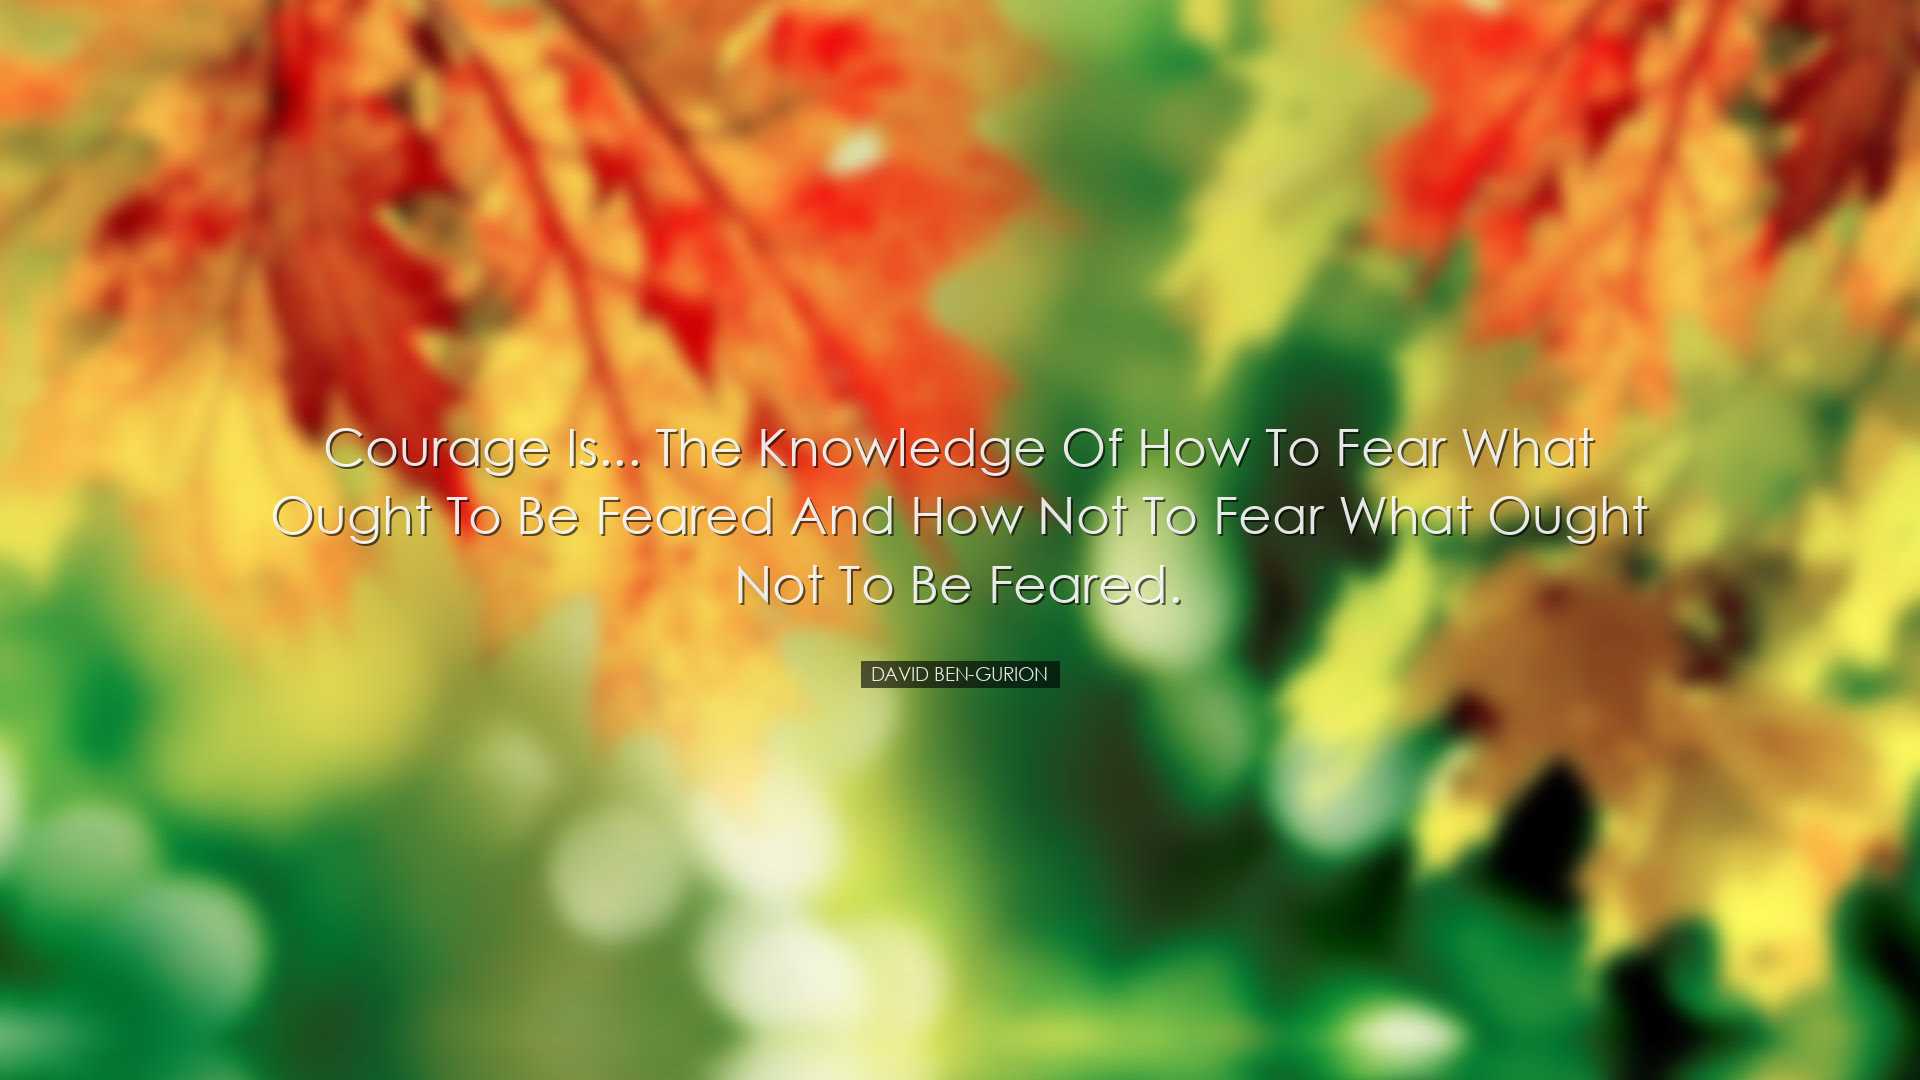 Courage is... the knowledge of how to fear what ought to be feared